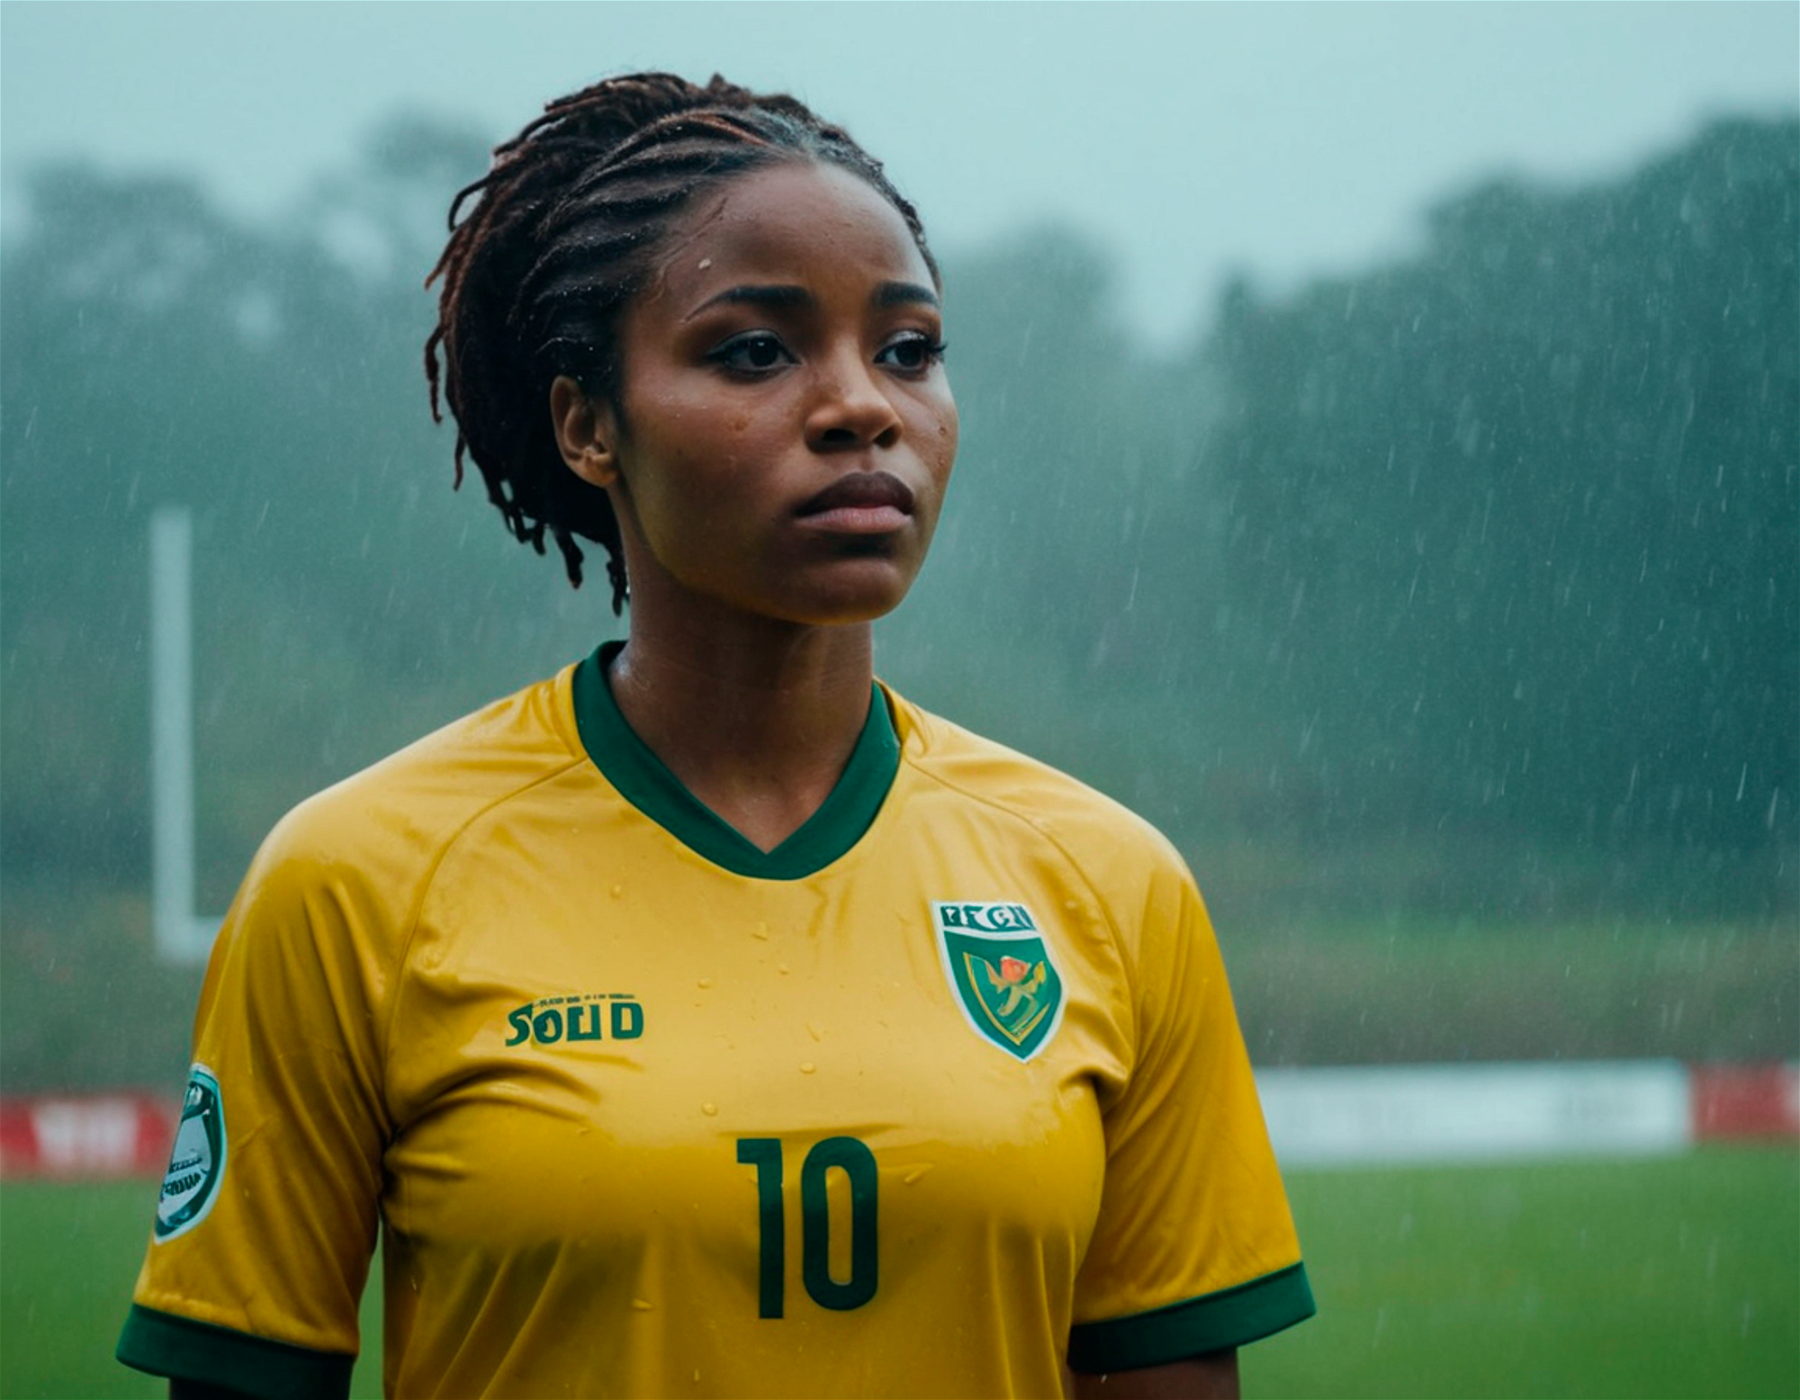 documentary, a thick black woman african soccer player, in a rainy morning